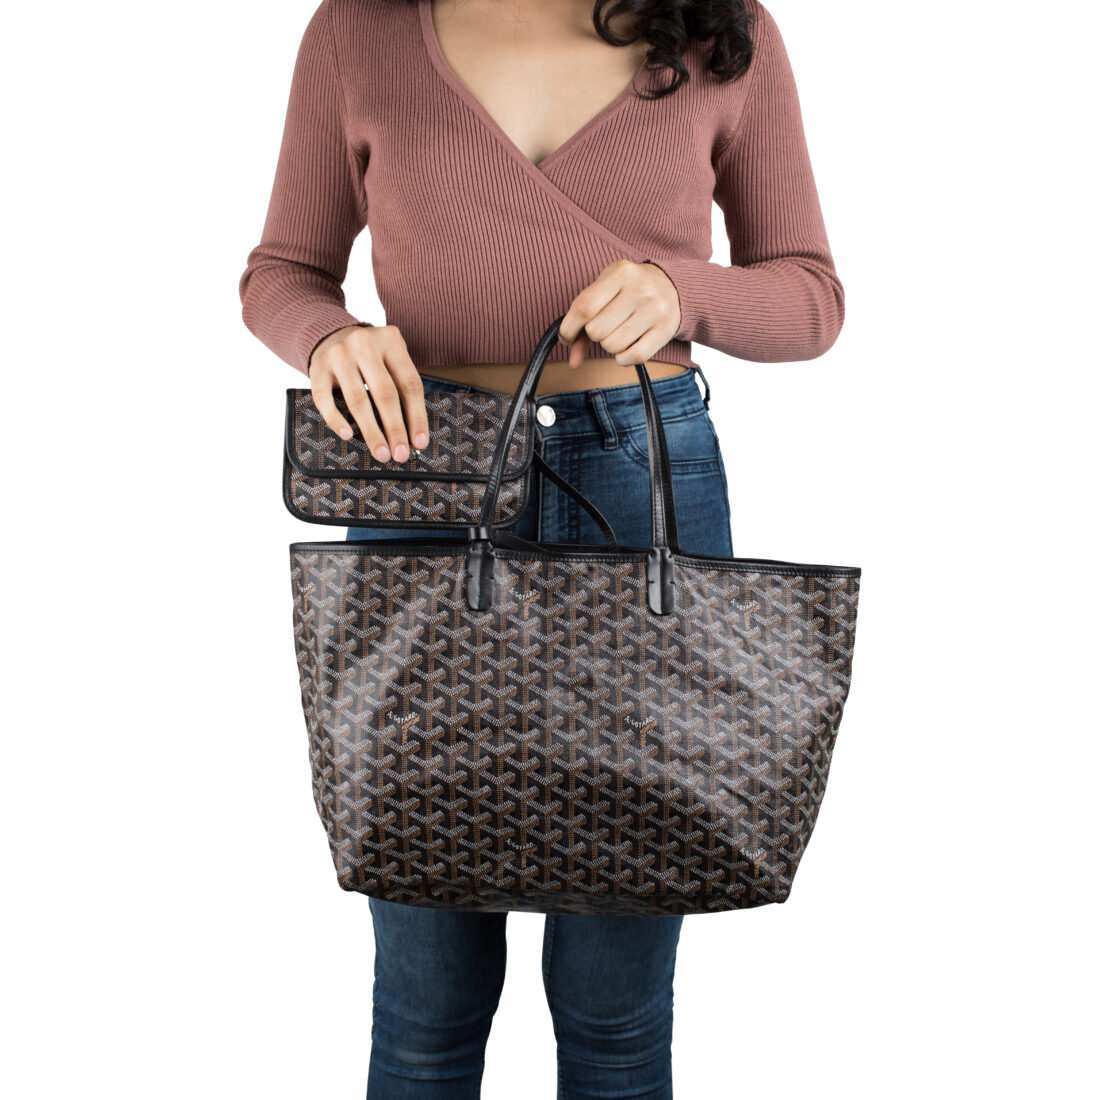 500 Bag by goyard Stock Pictures, Editorial Images and Stock